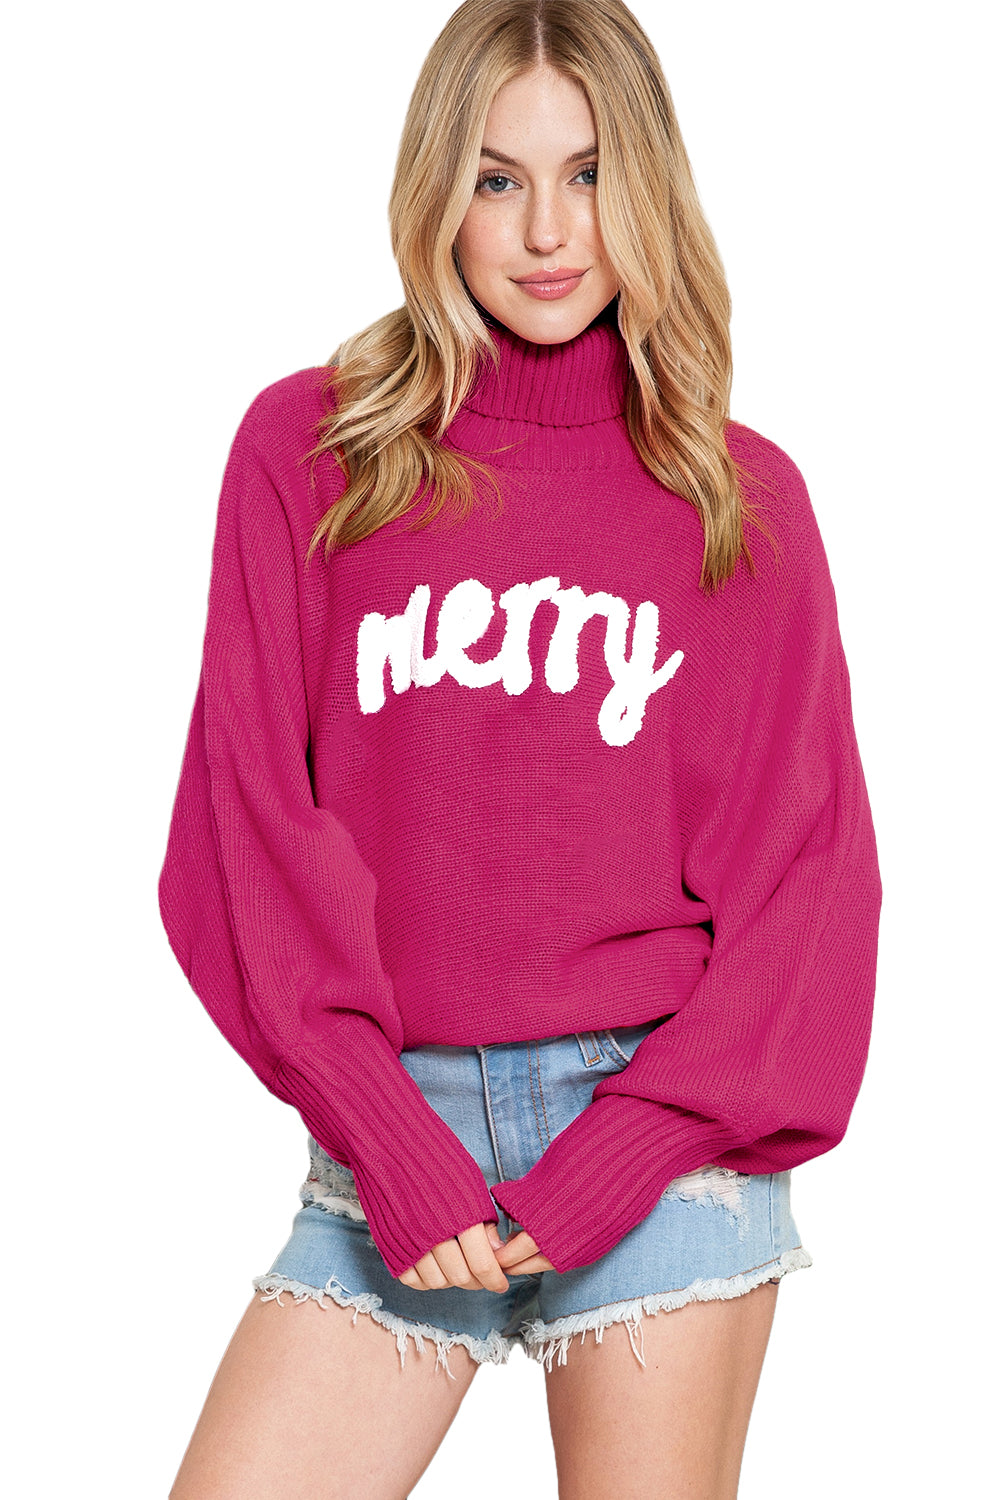 Red Turtle Neck Batwing Sleeve Merry Christmas Sweater